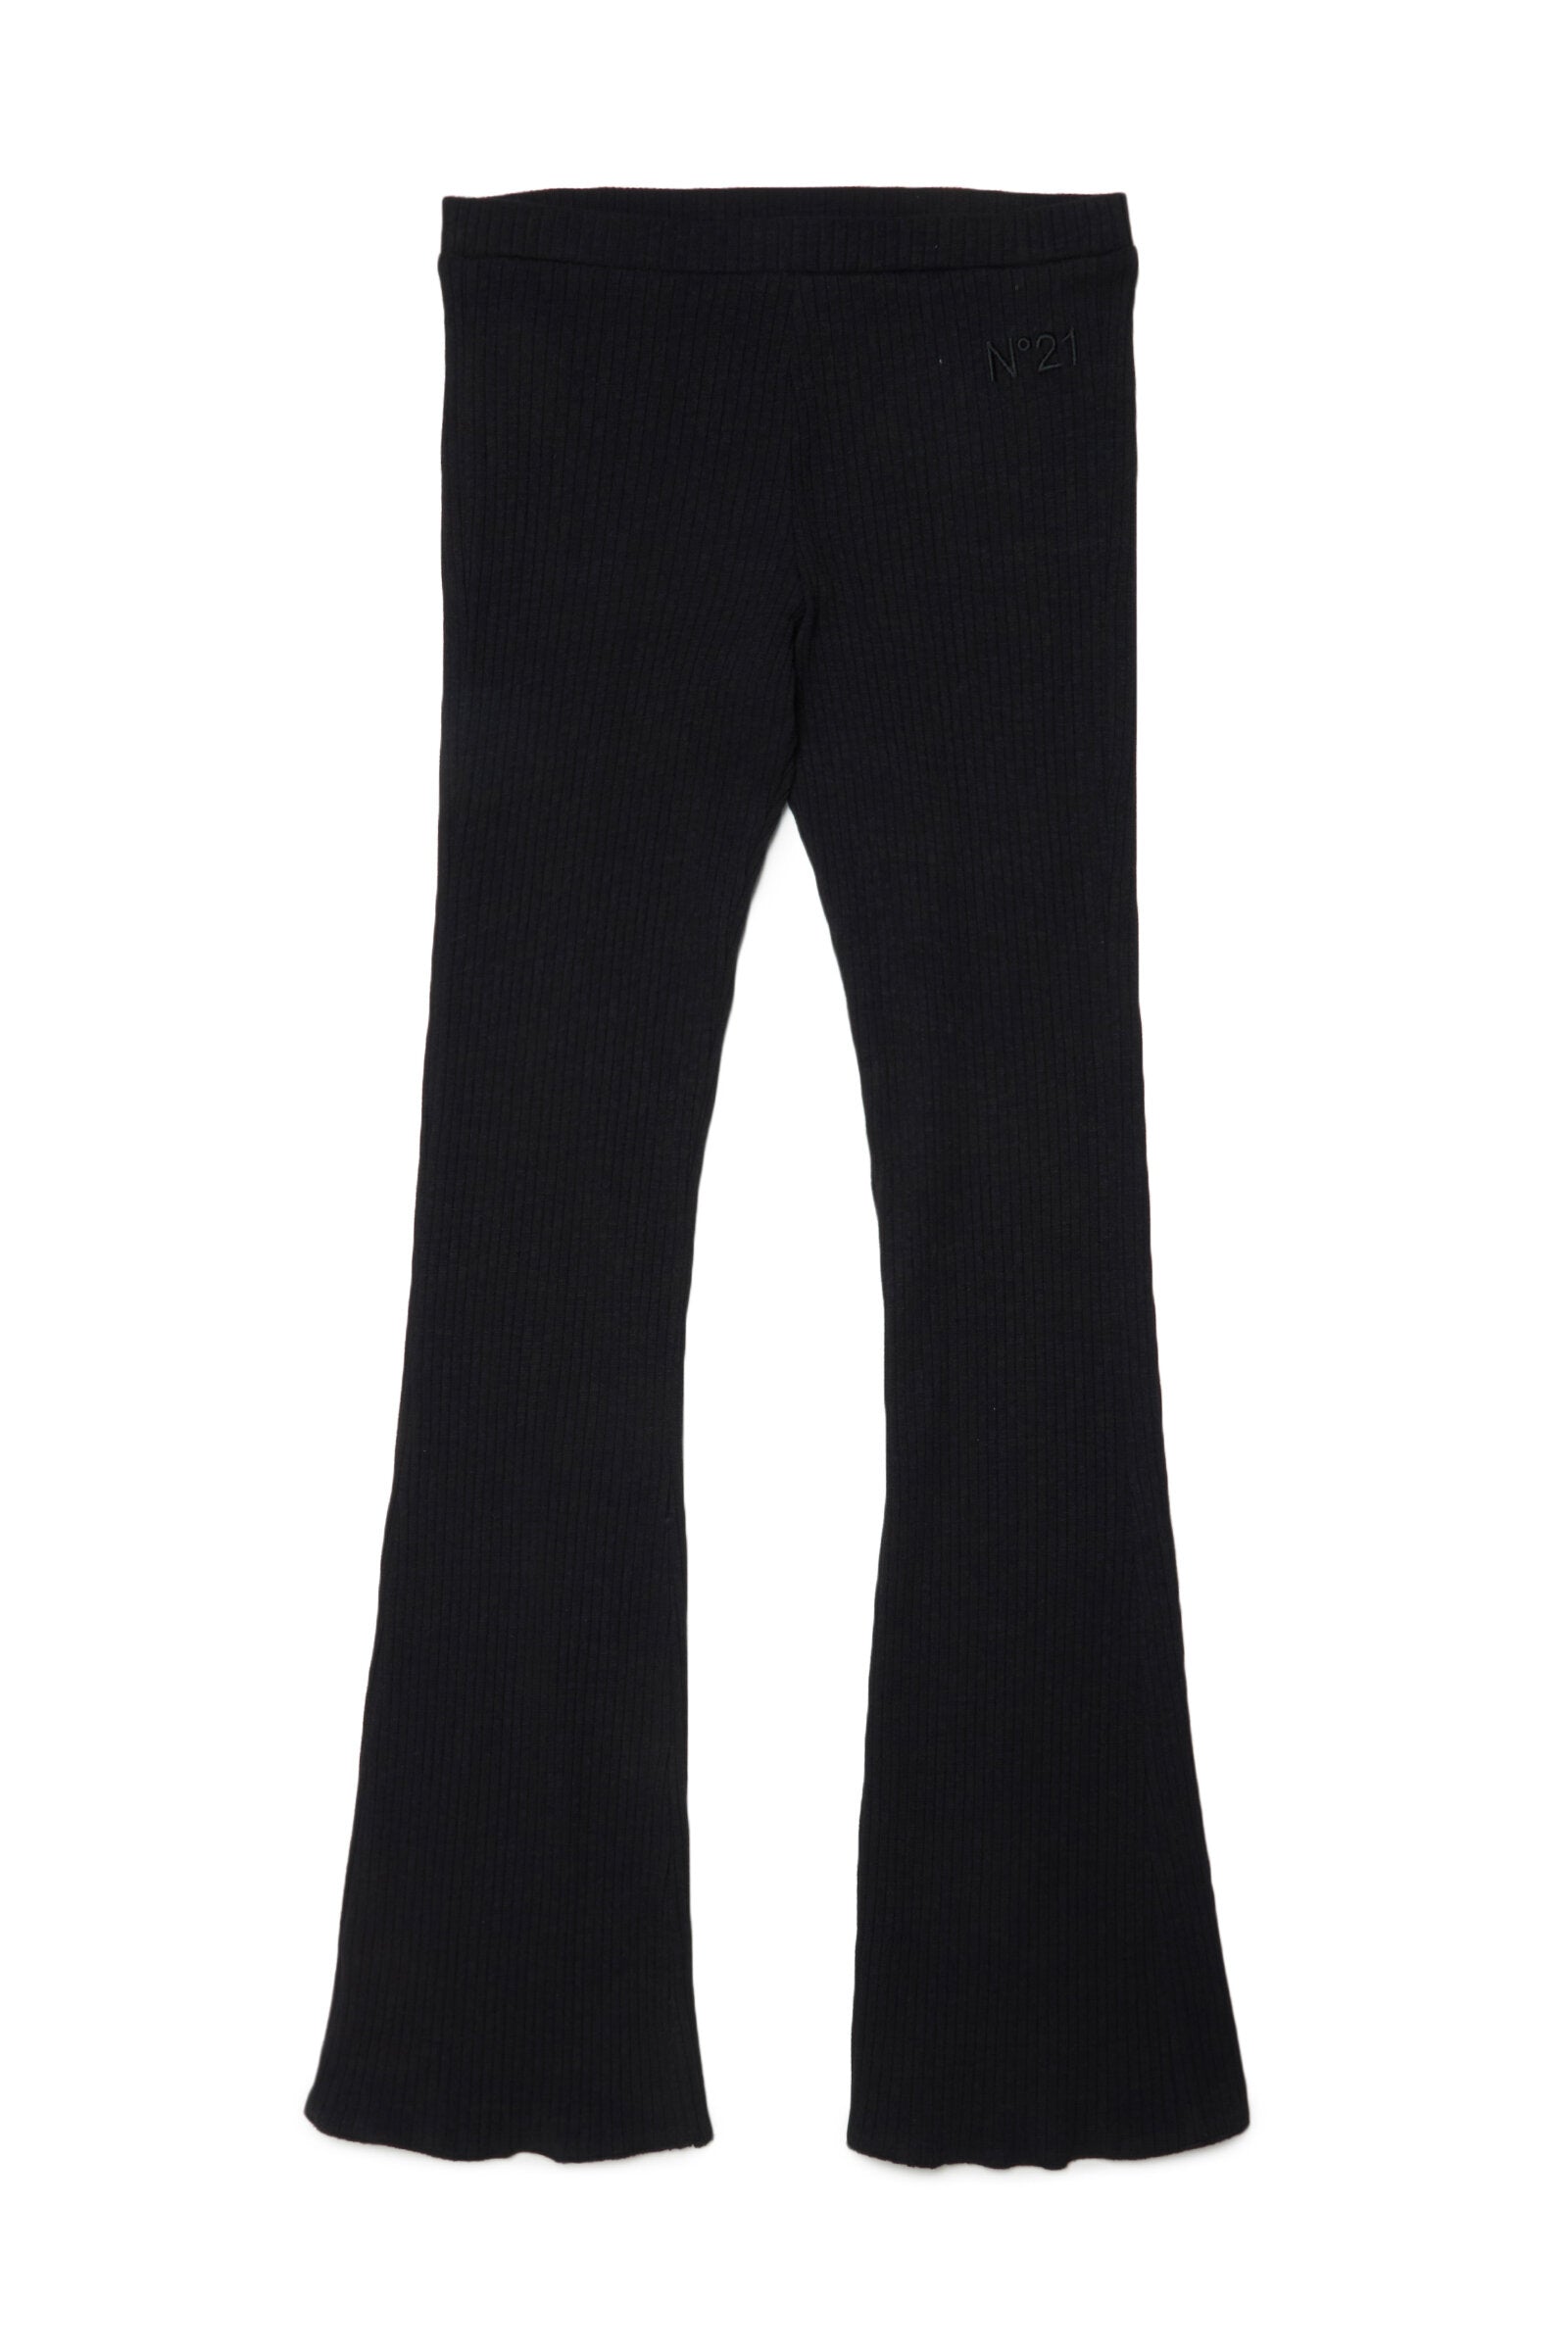 Black bootcut leggings in ribbed stretch cotton